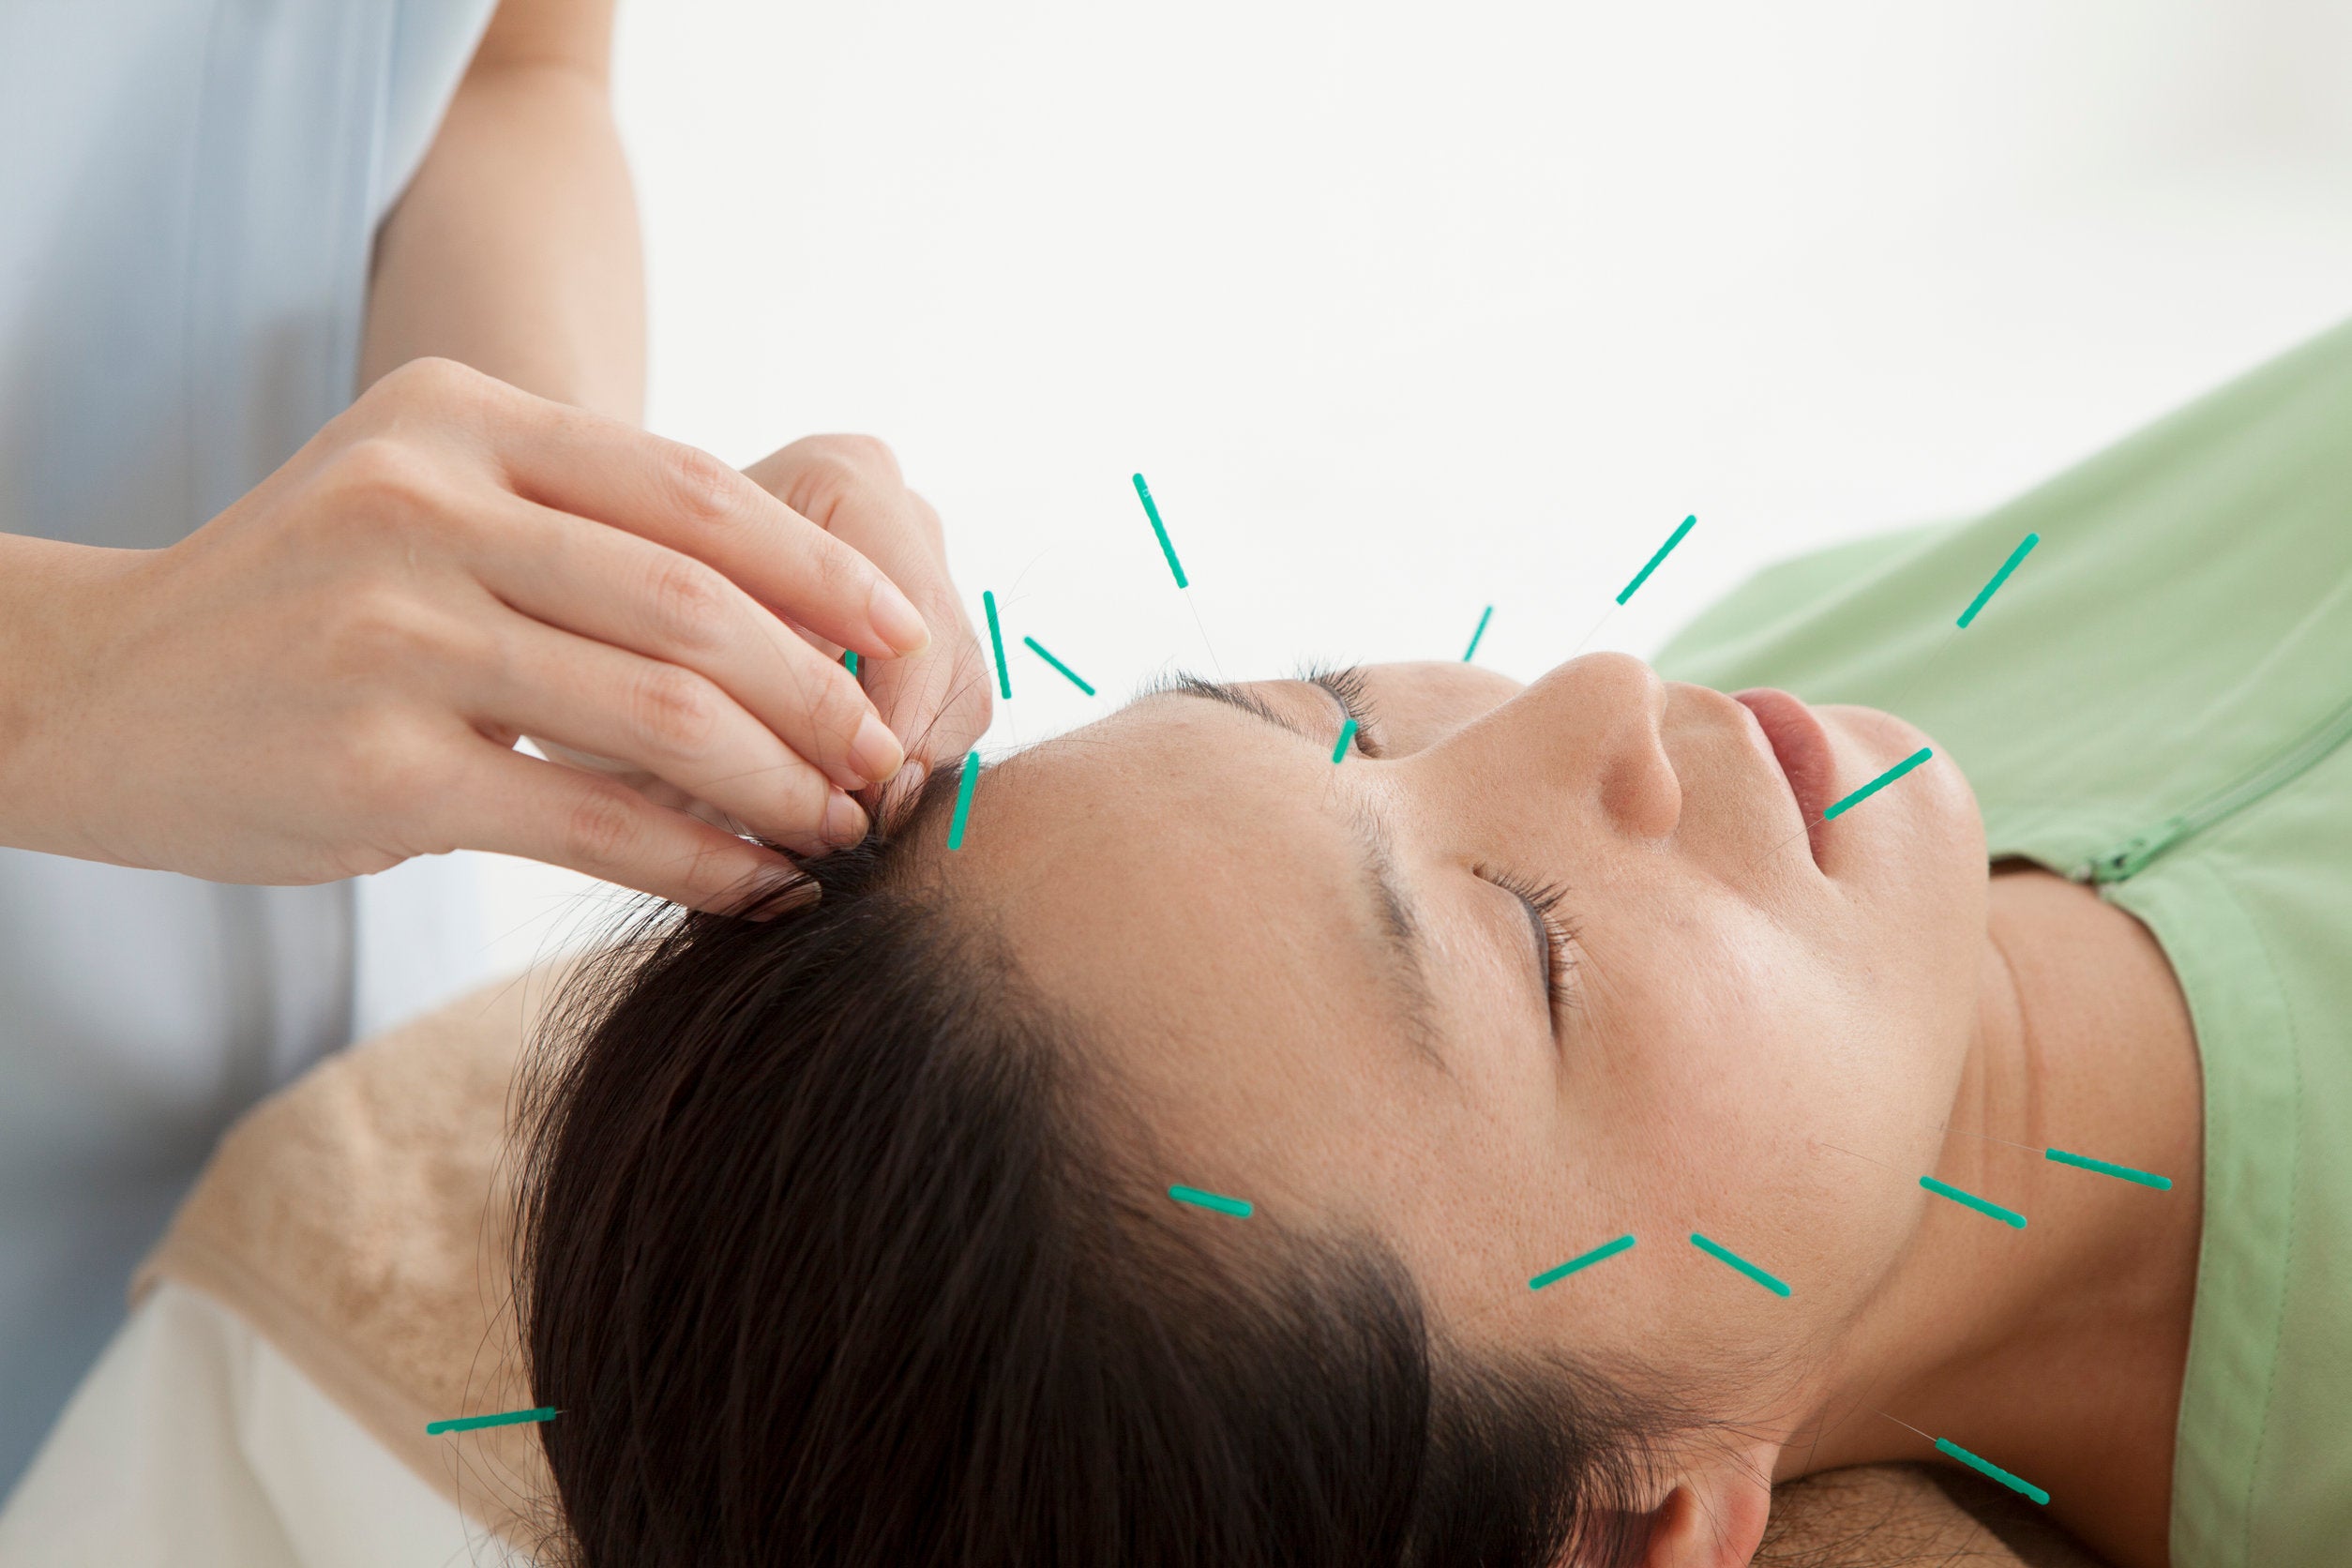 How Does Acupuncture Therapy Reduce Inflammation And Minimize Pain?